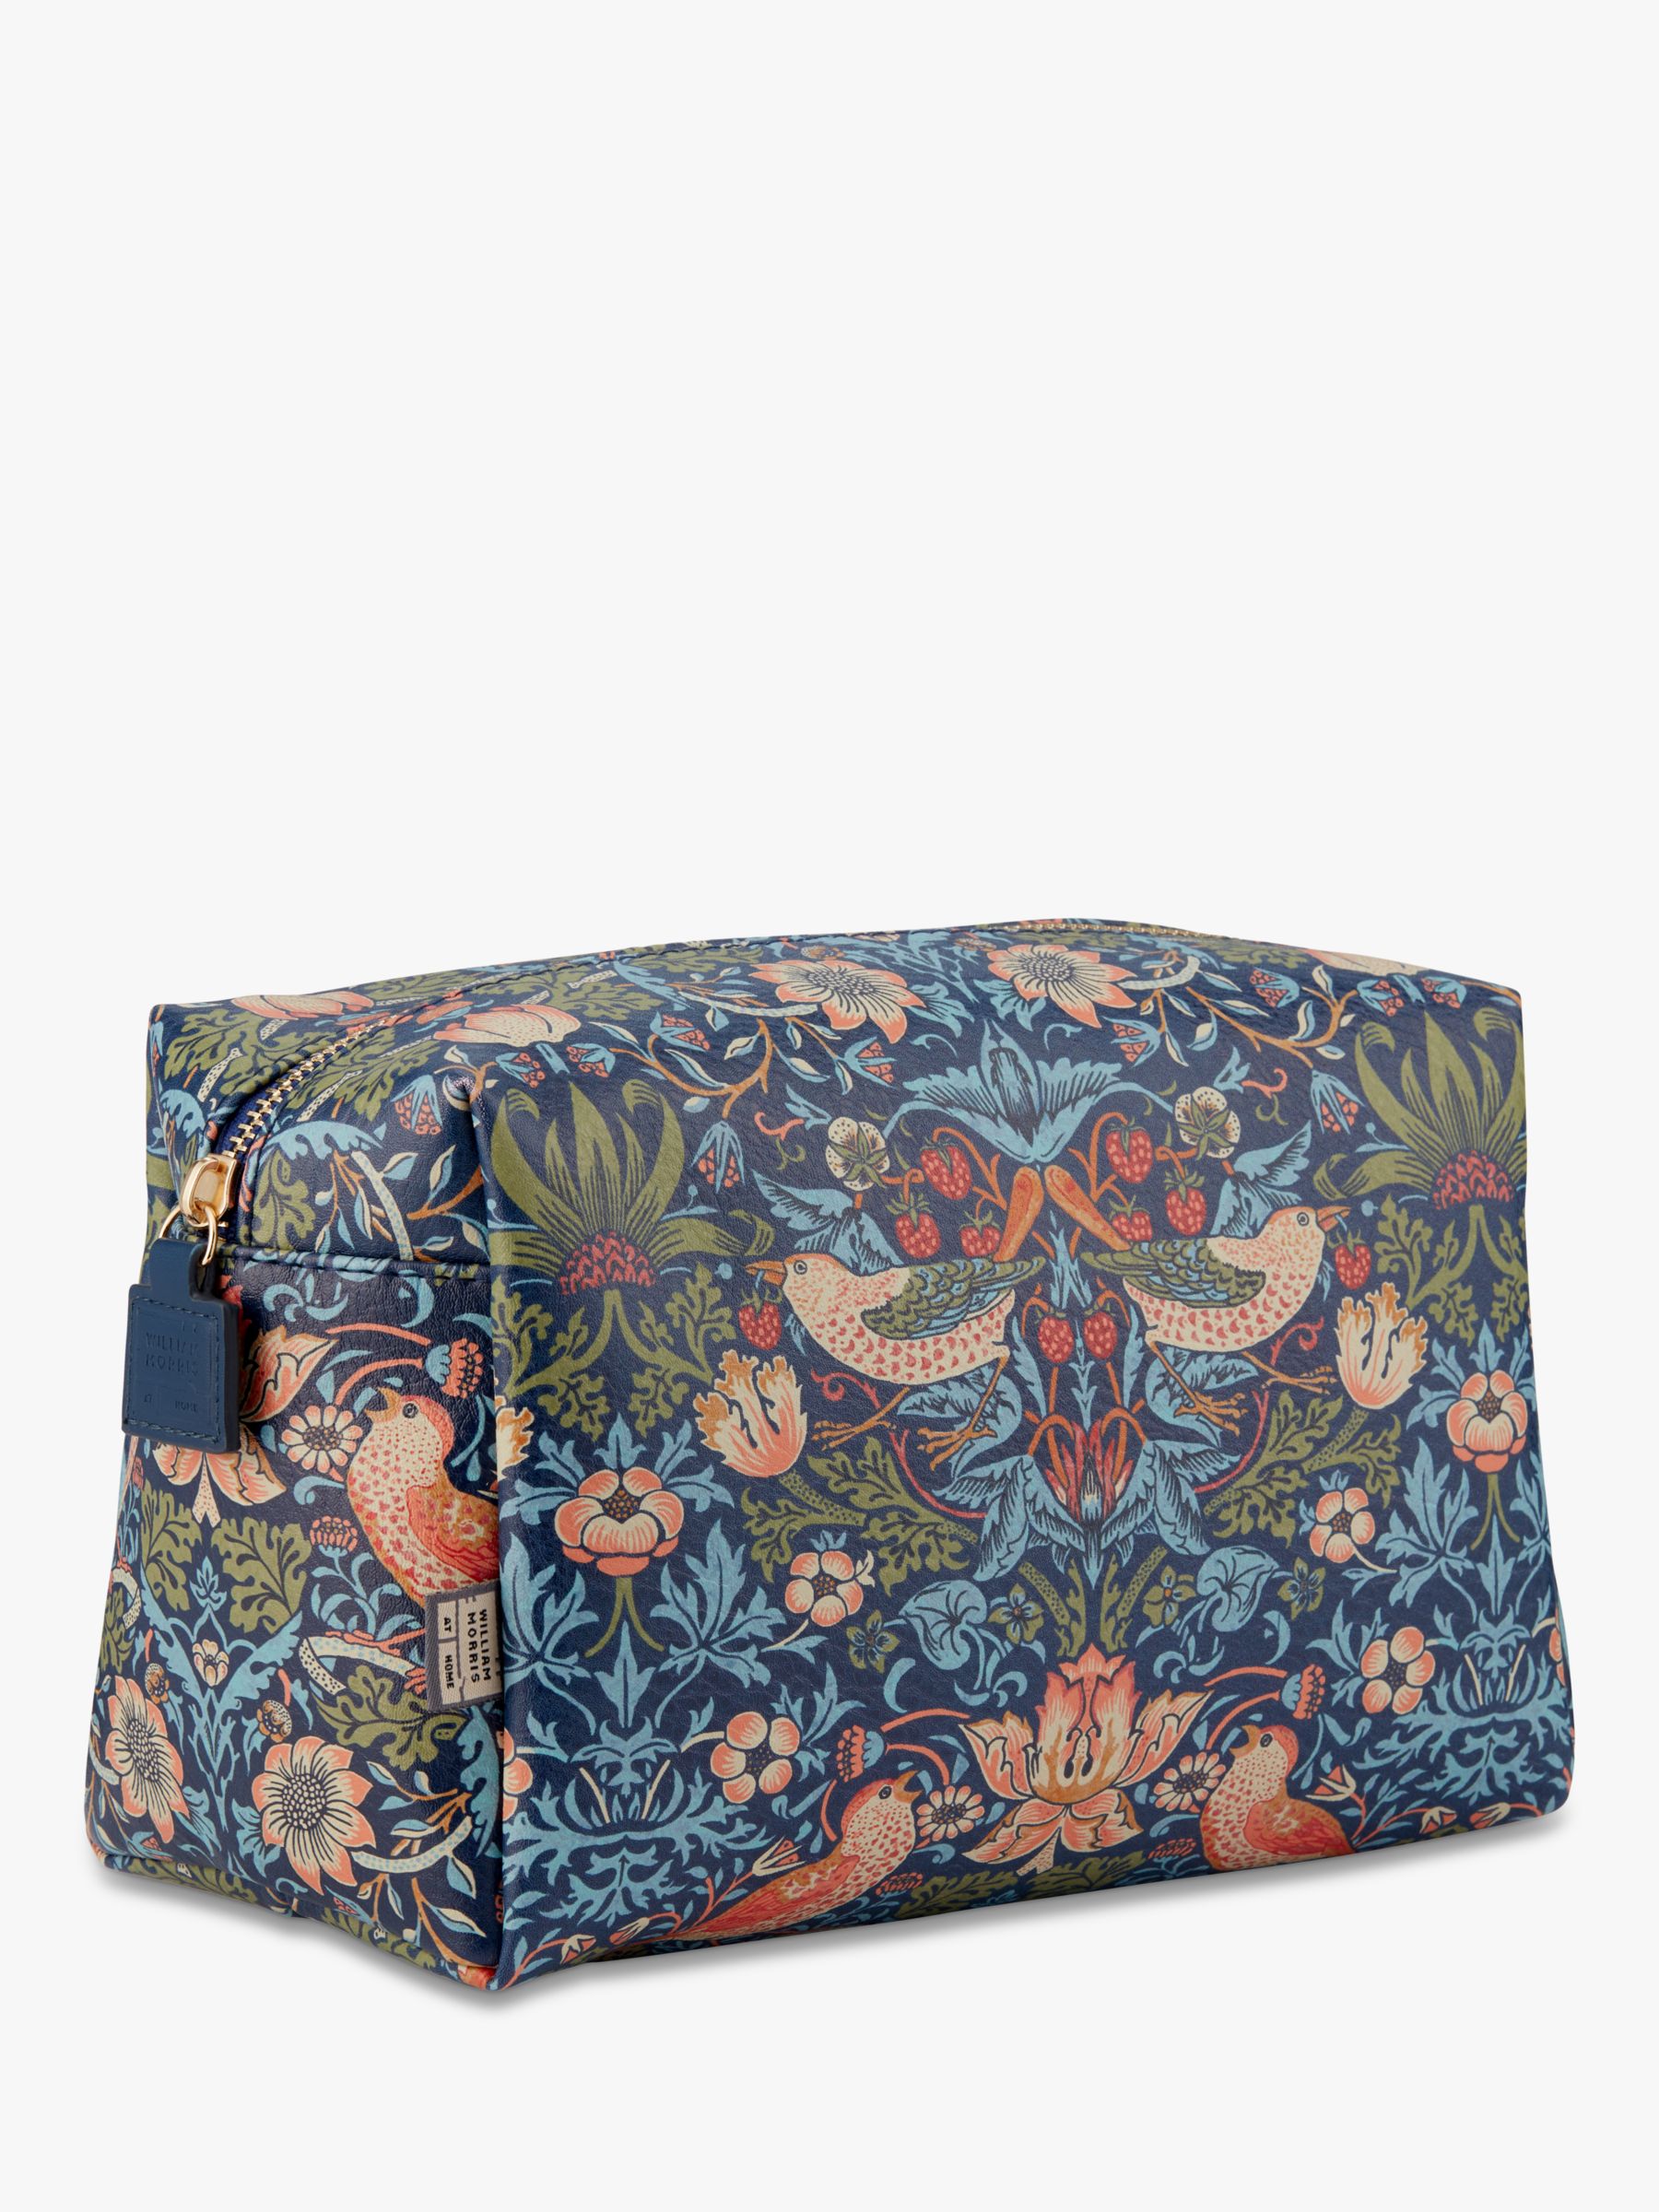 William Morris At Home Strawberry Thief Large Wash Bag 3